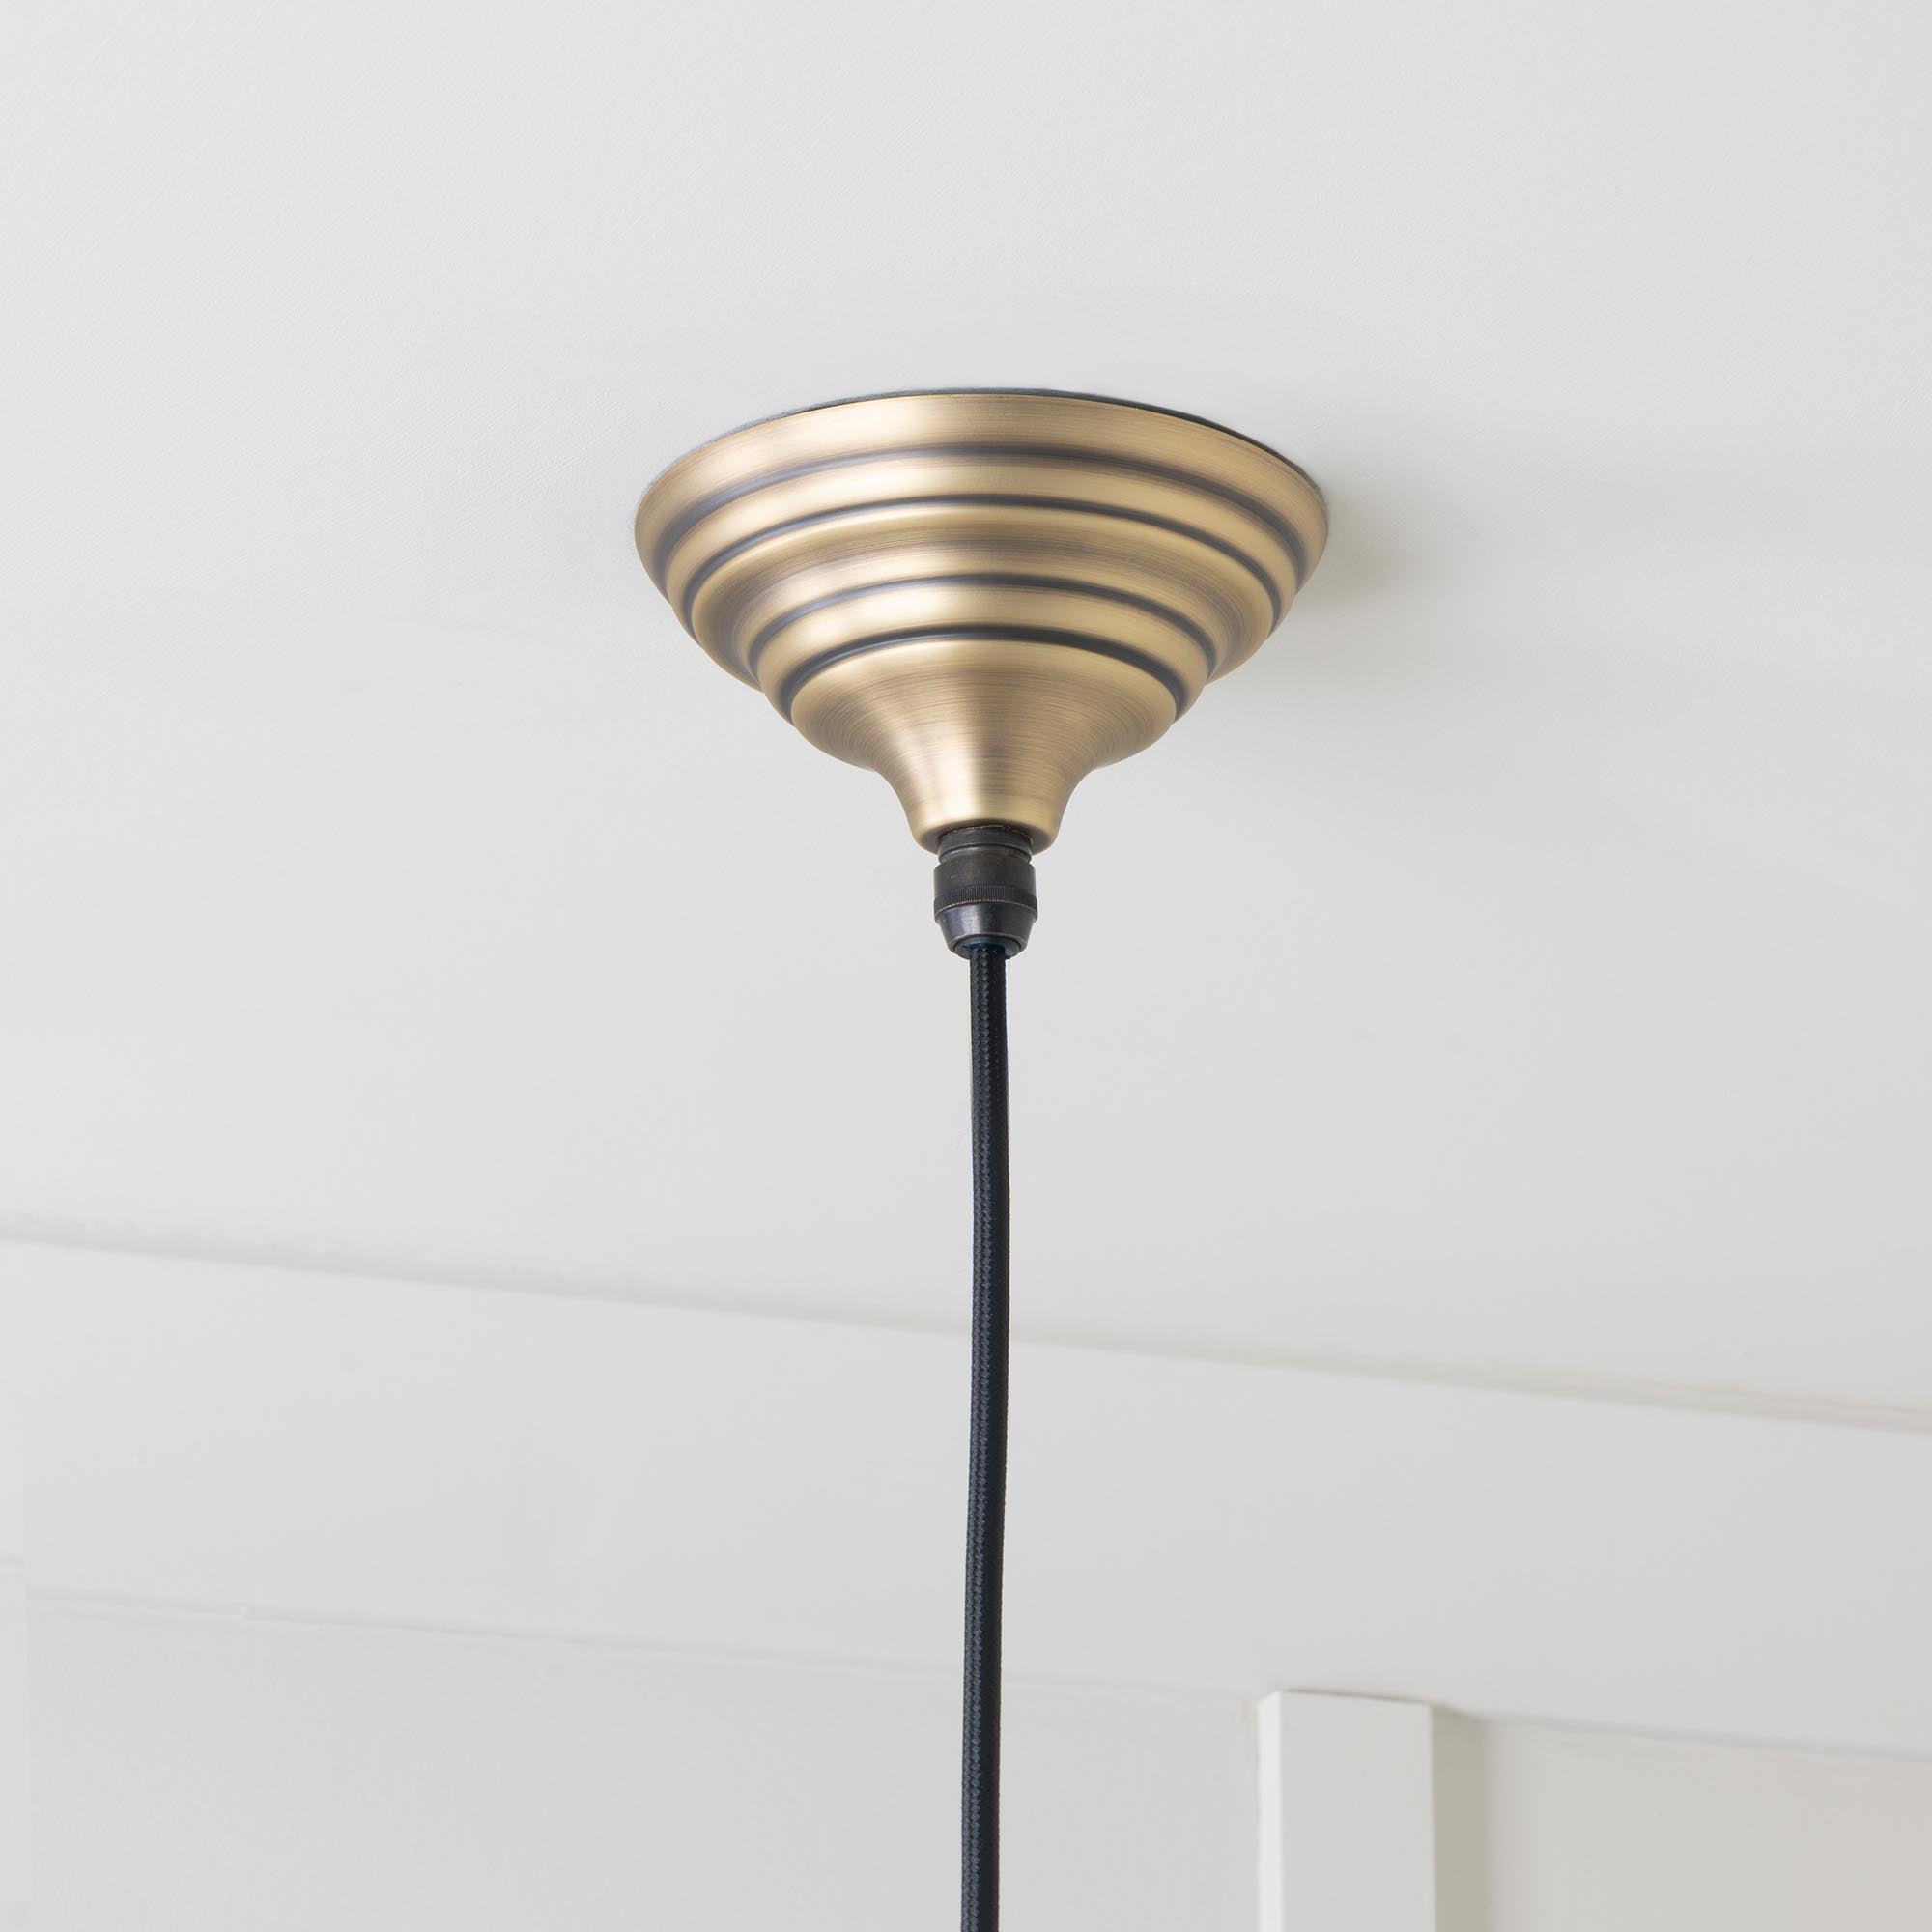 SHOW Close Up Image of Brindley Ceiling Light in Aged Brass